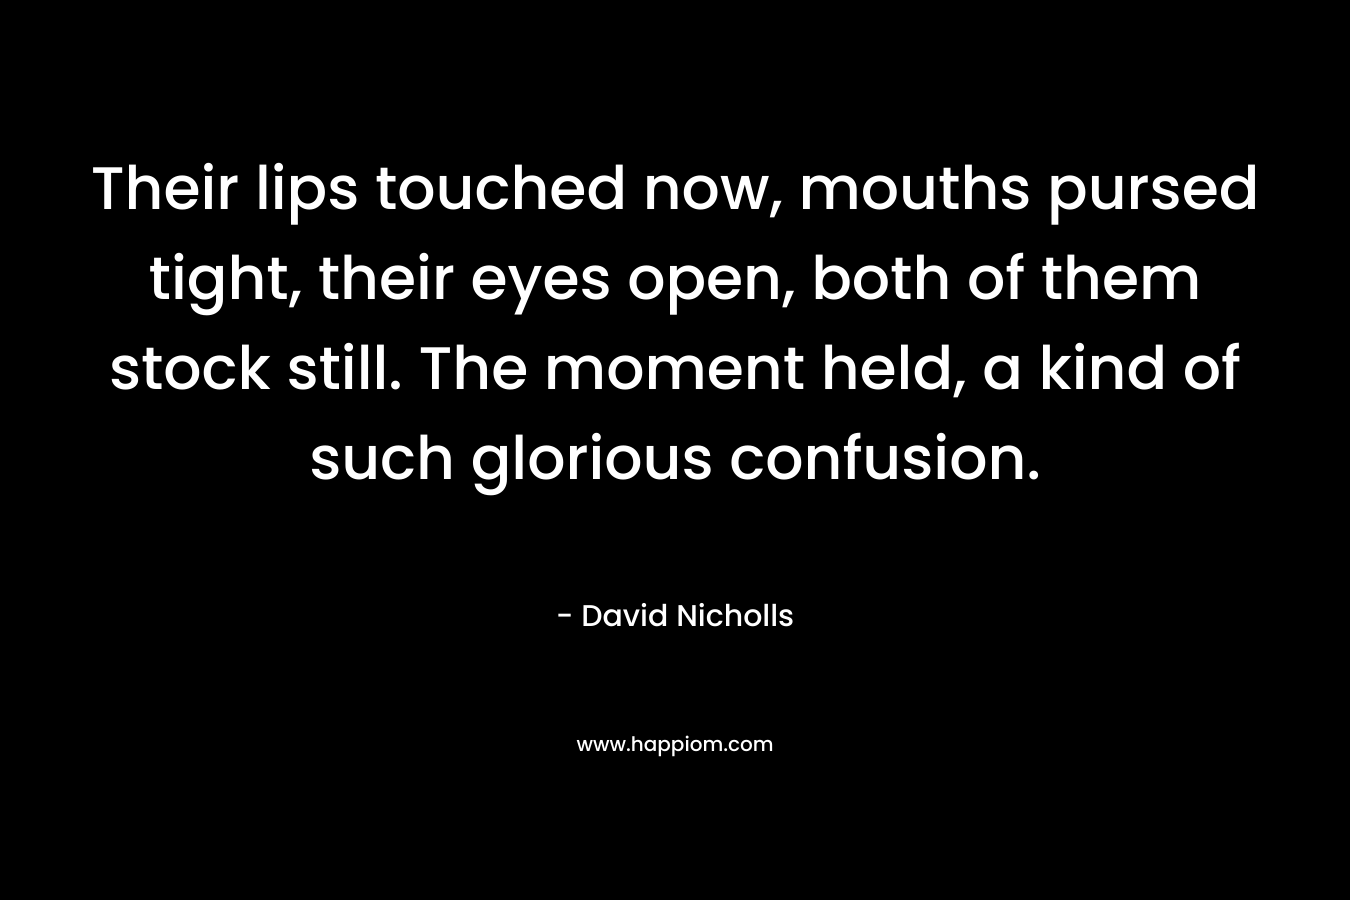 Their lips touched now, mouths pursed tight, their eyes open, both of them stock still. The moment held, a kind of such glorious confusion. – David Nicholls